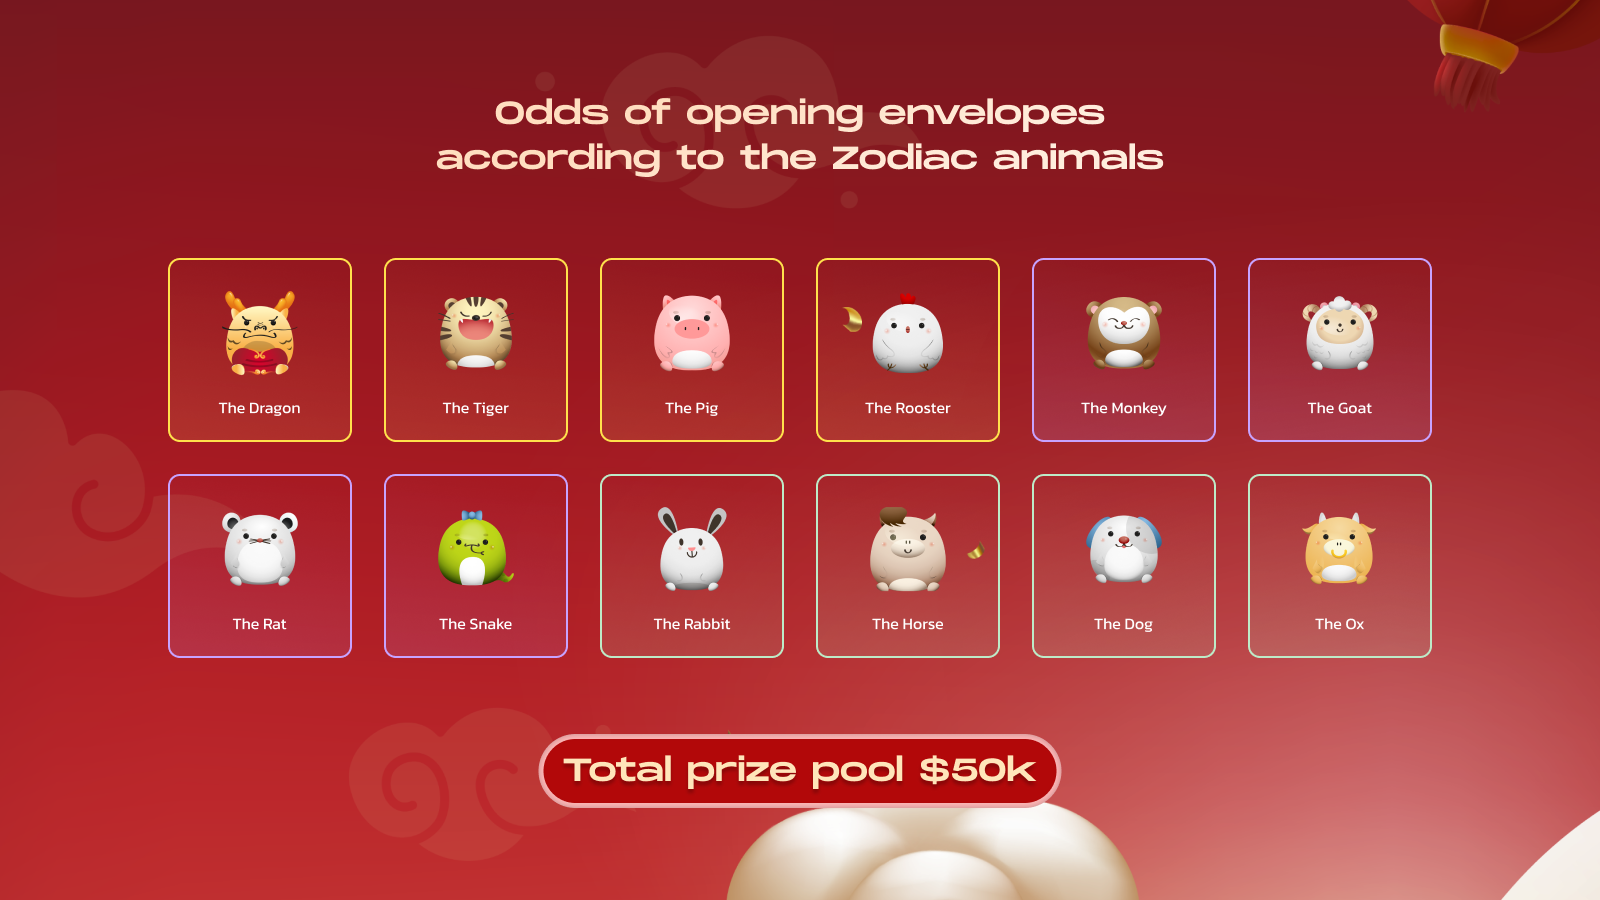 Odds of opening envelopes according to the Zodiac animals